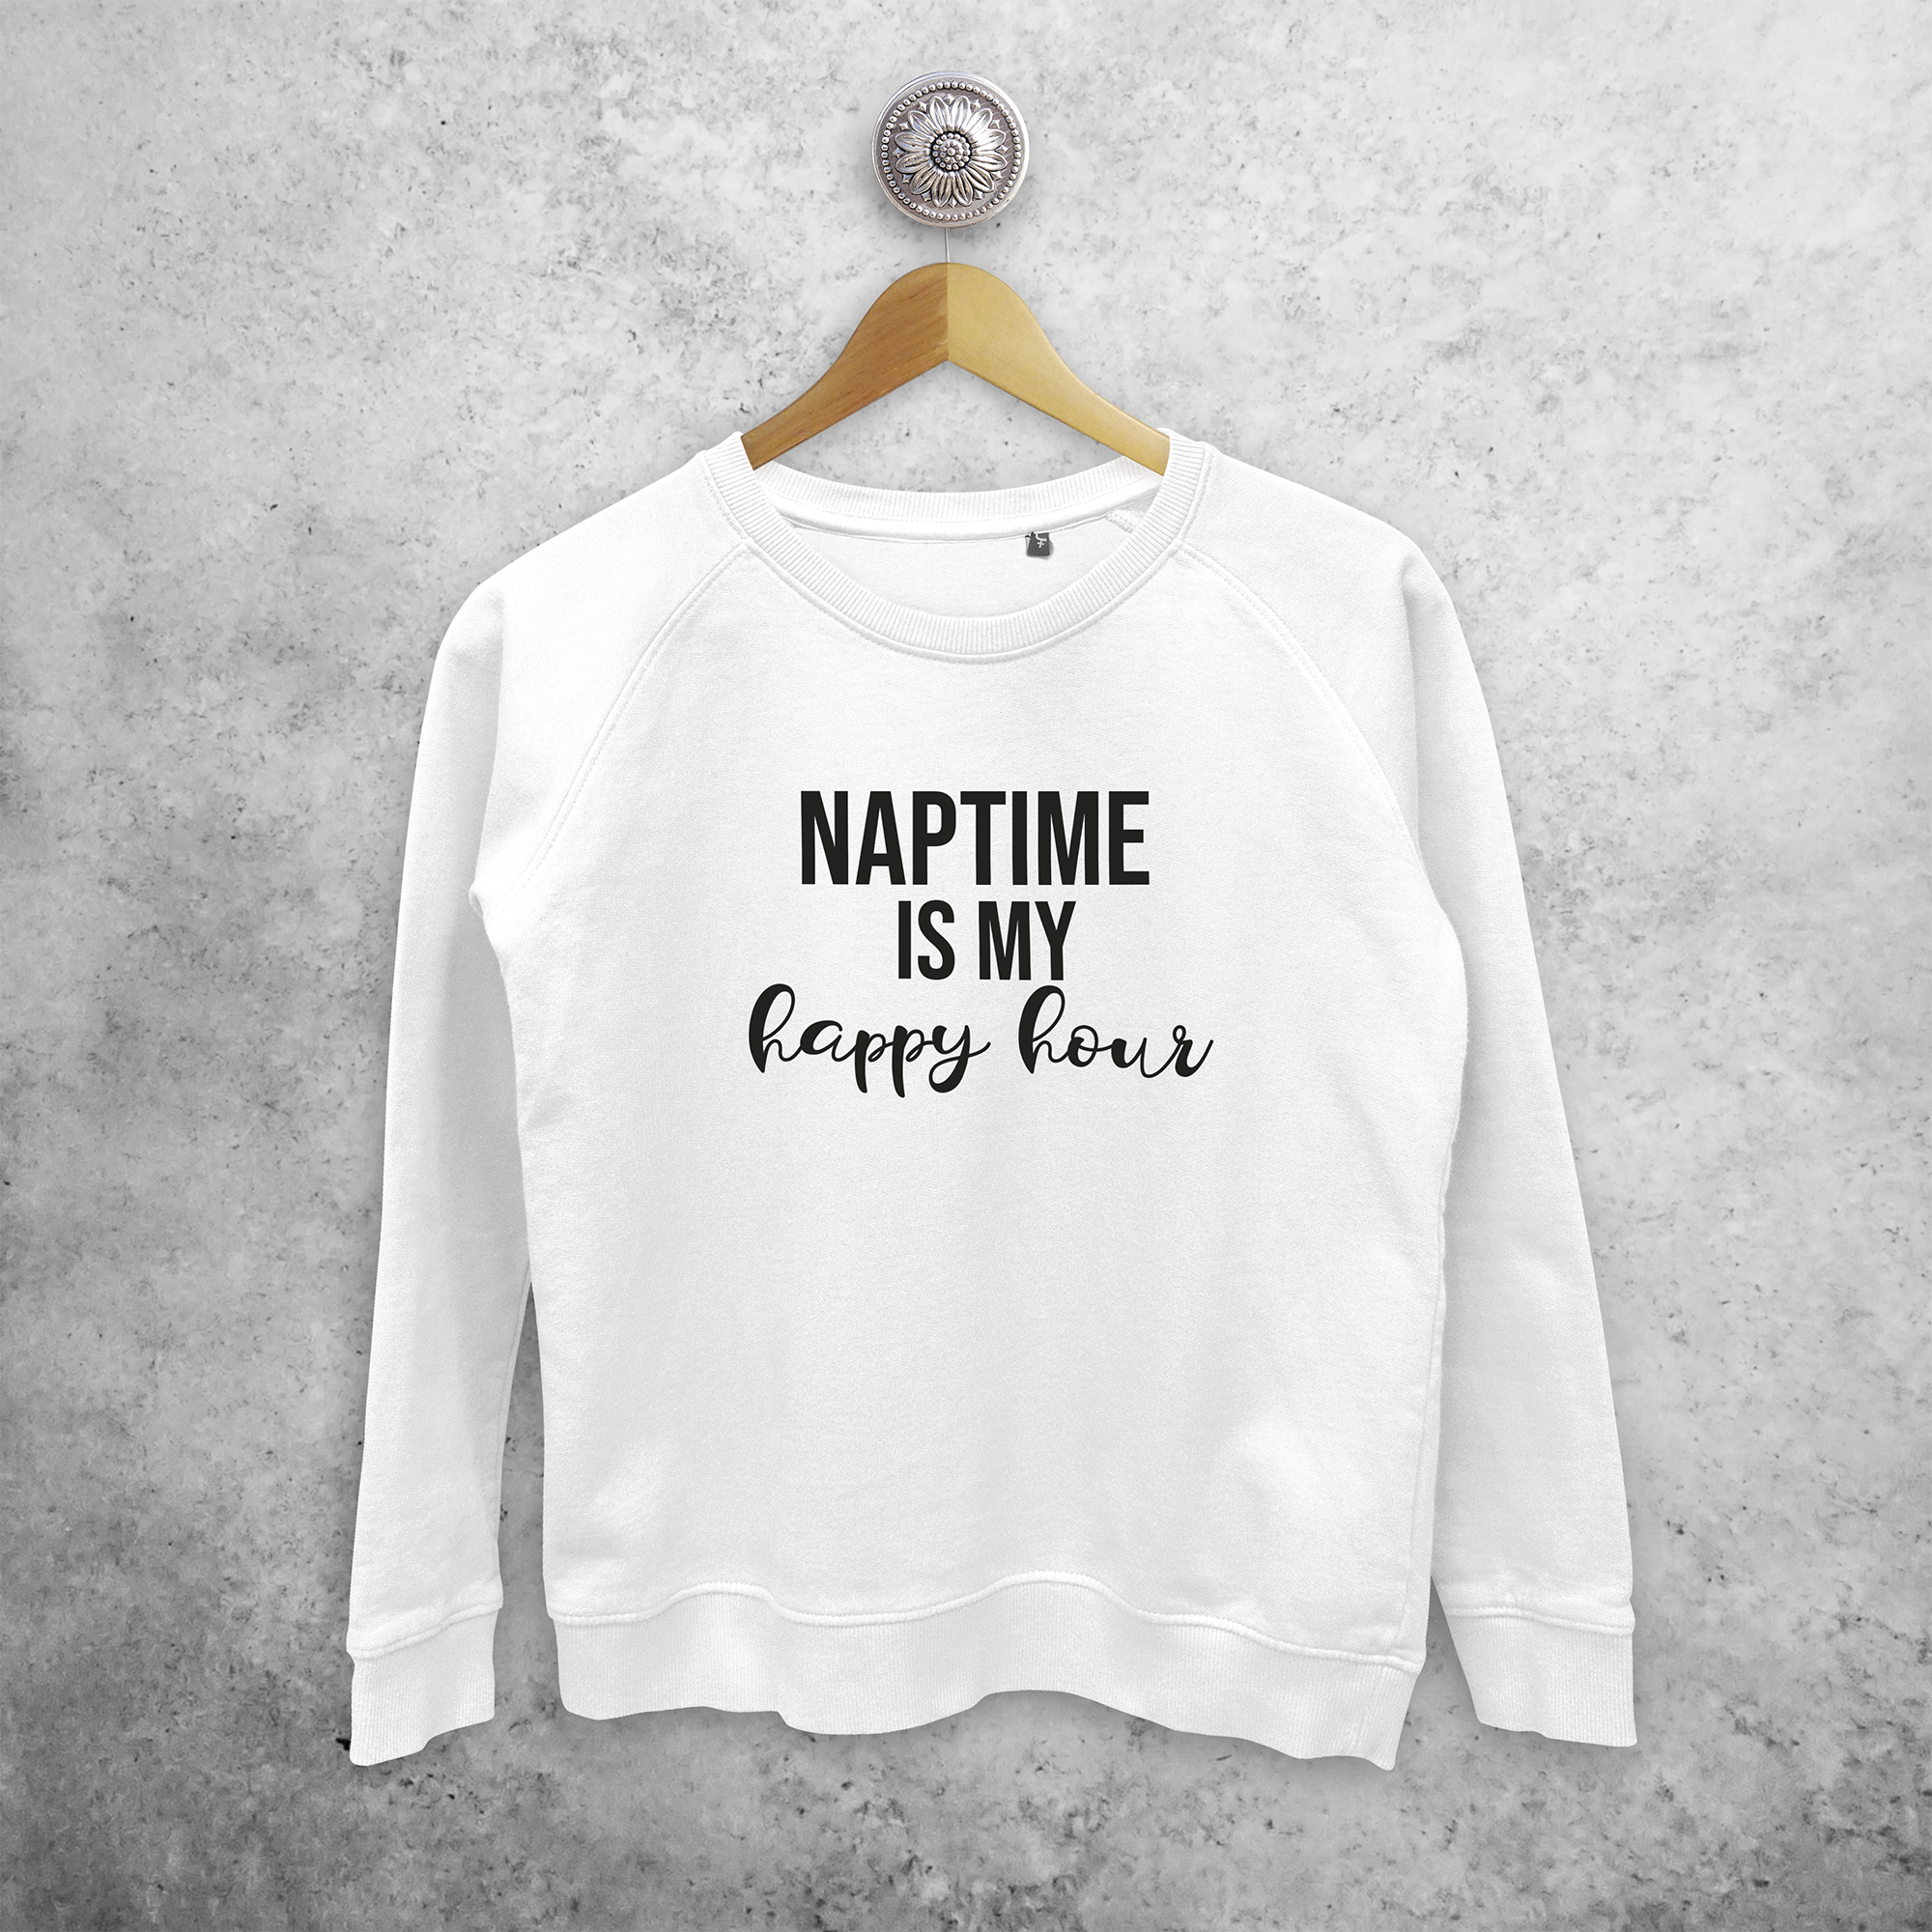 'Naptime is my happy hour' sweater